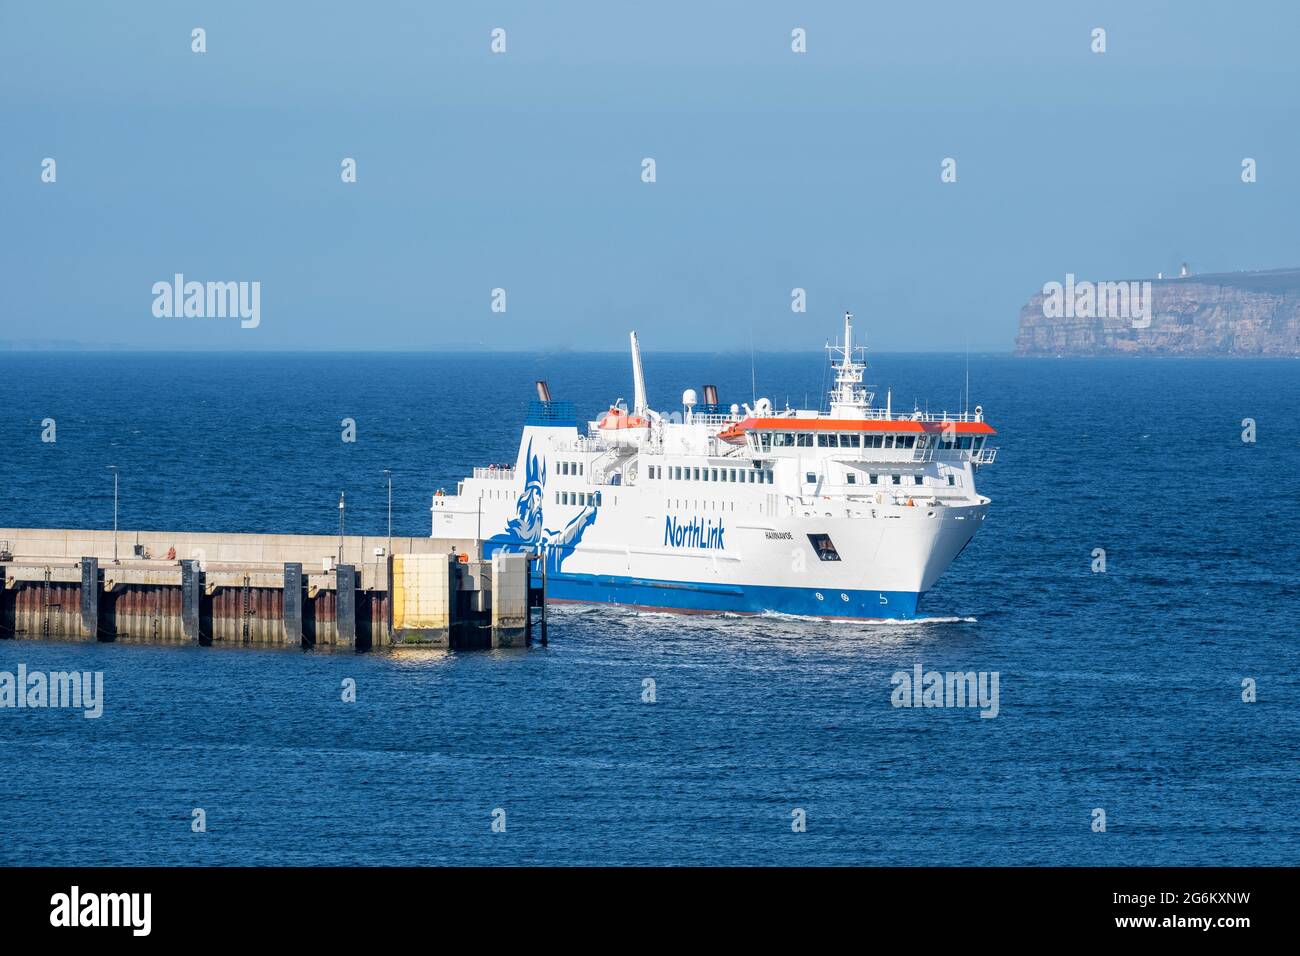 Northlink ferry arriving into Scrabster harbour, Thurso, Caithness, Scotland. Stock Photo